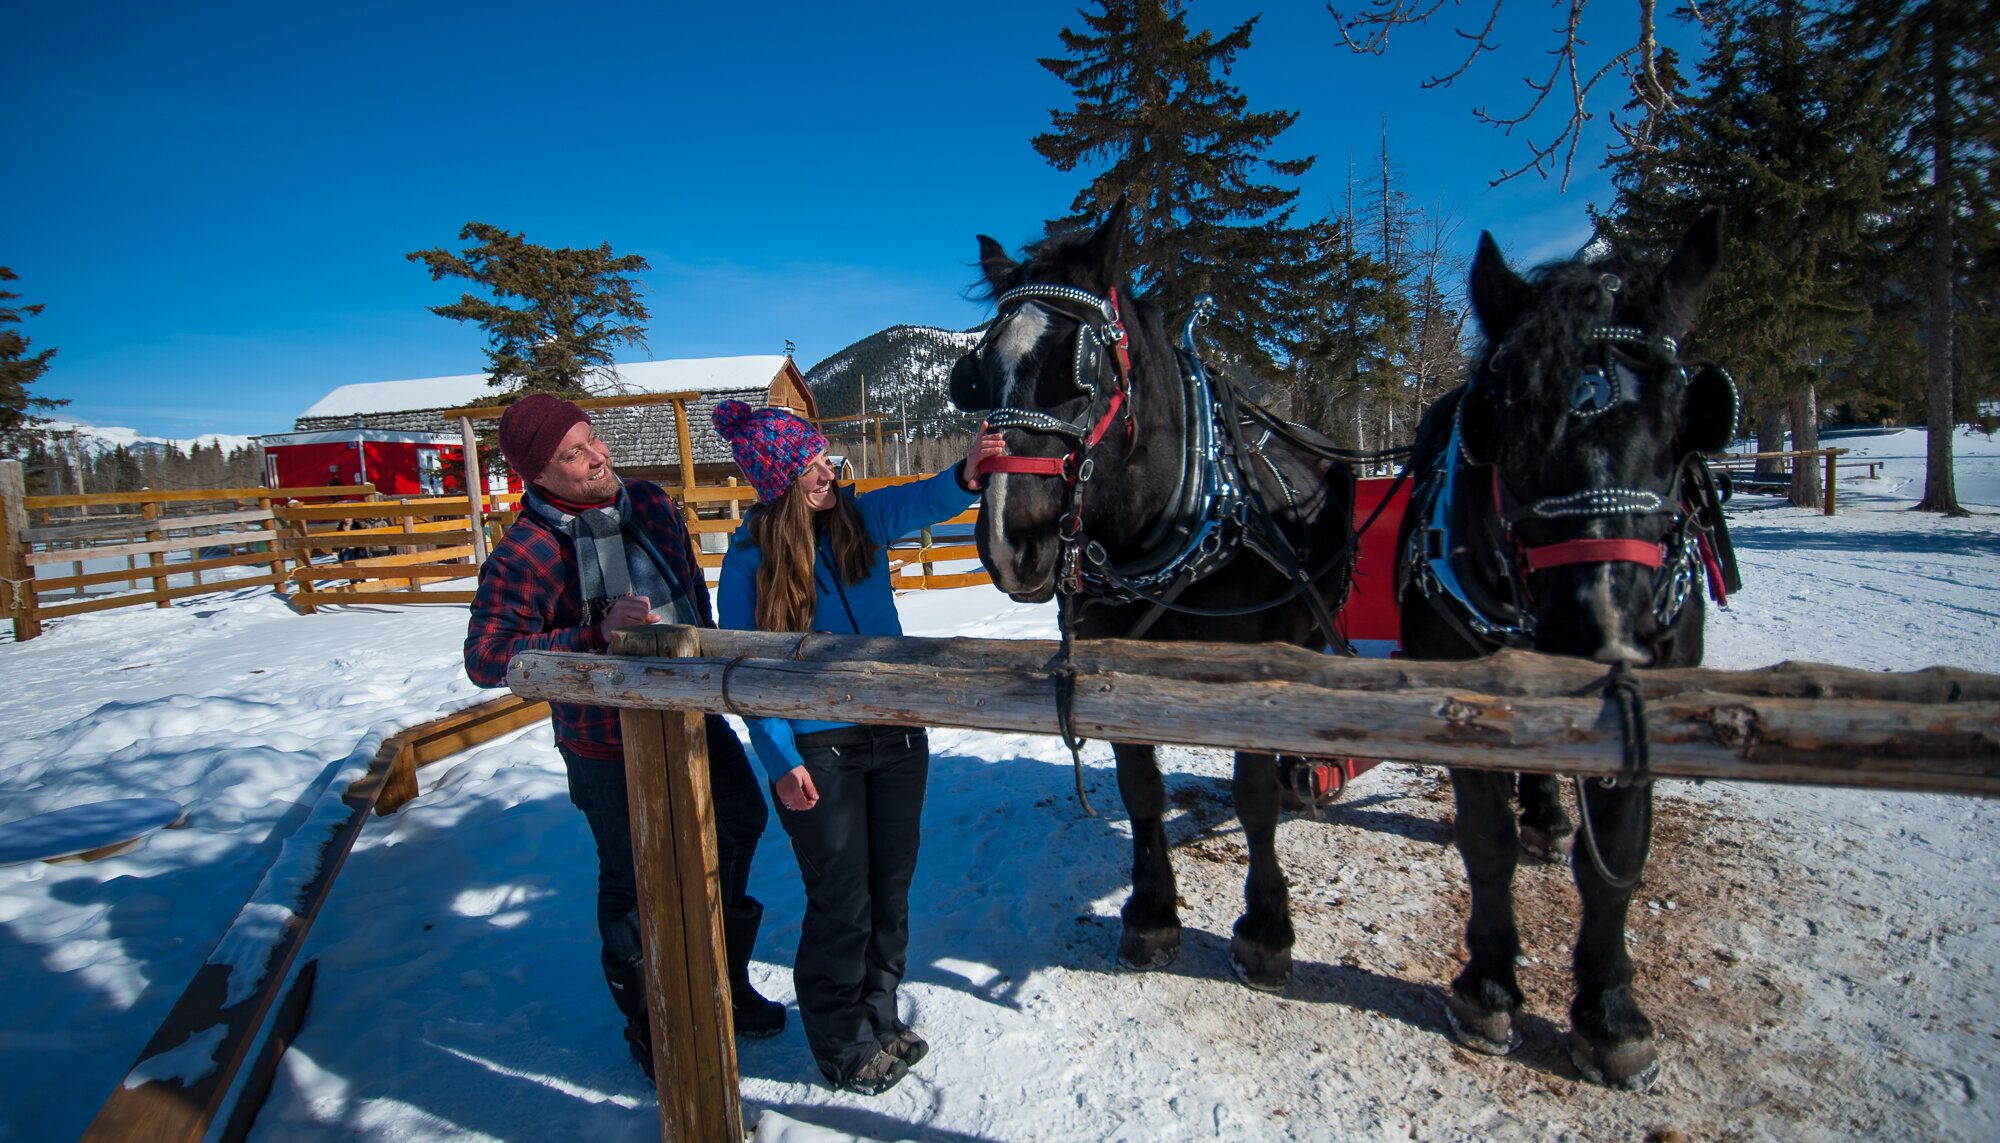 A couple pet the horses after their sleigh ride at the warner stables in Banff